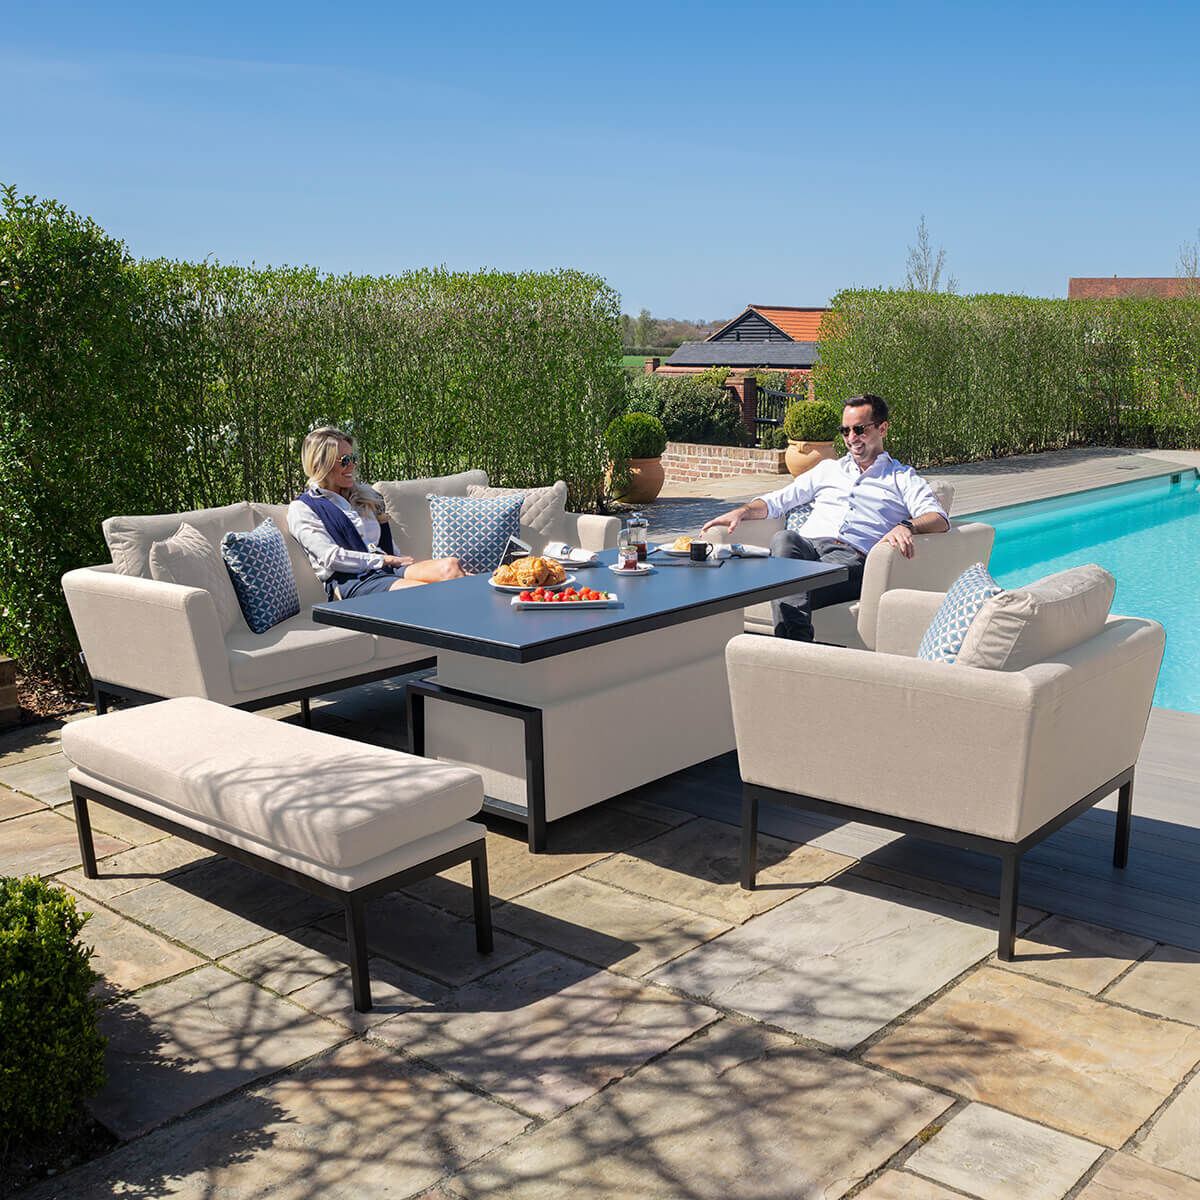 Maze - Outdoor Fabric Pulse 3 Seat Sofa Set with Rising Table - Oatmeal product image